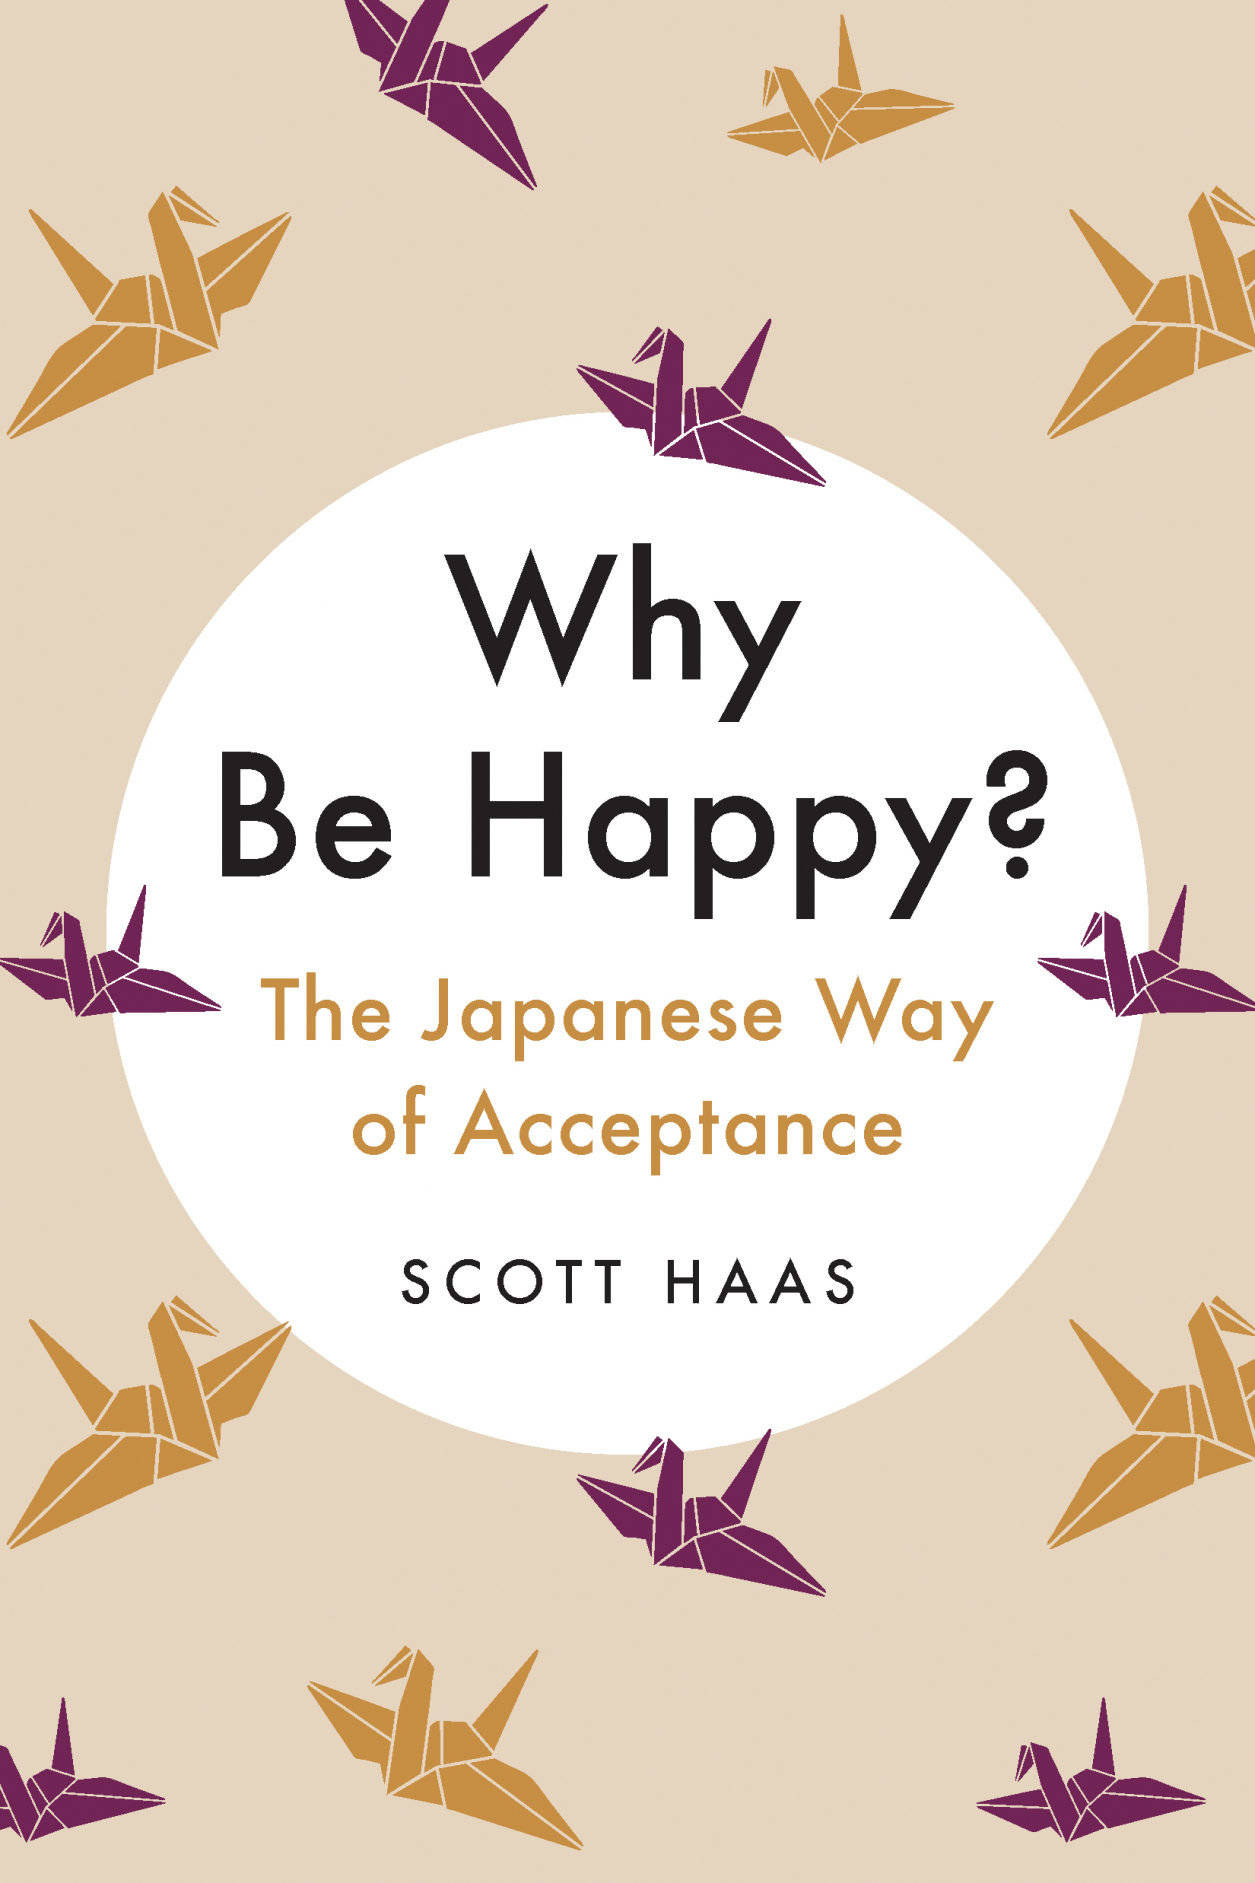 Why Be Happy? by Scott Haas